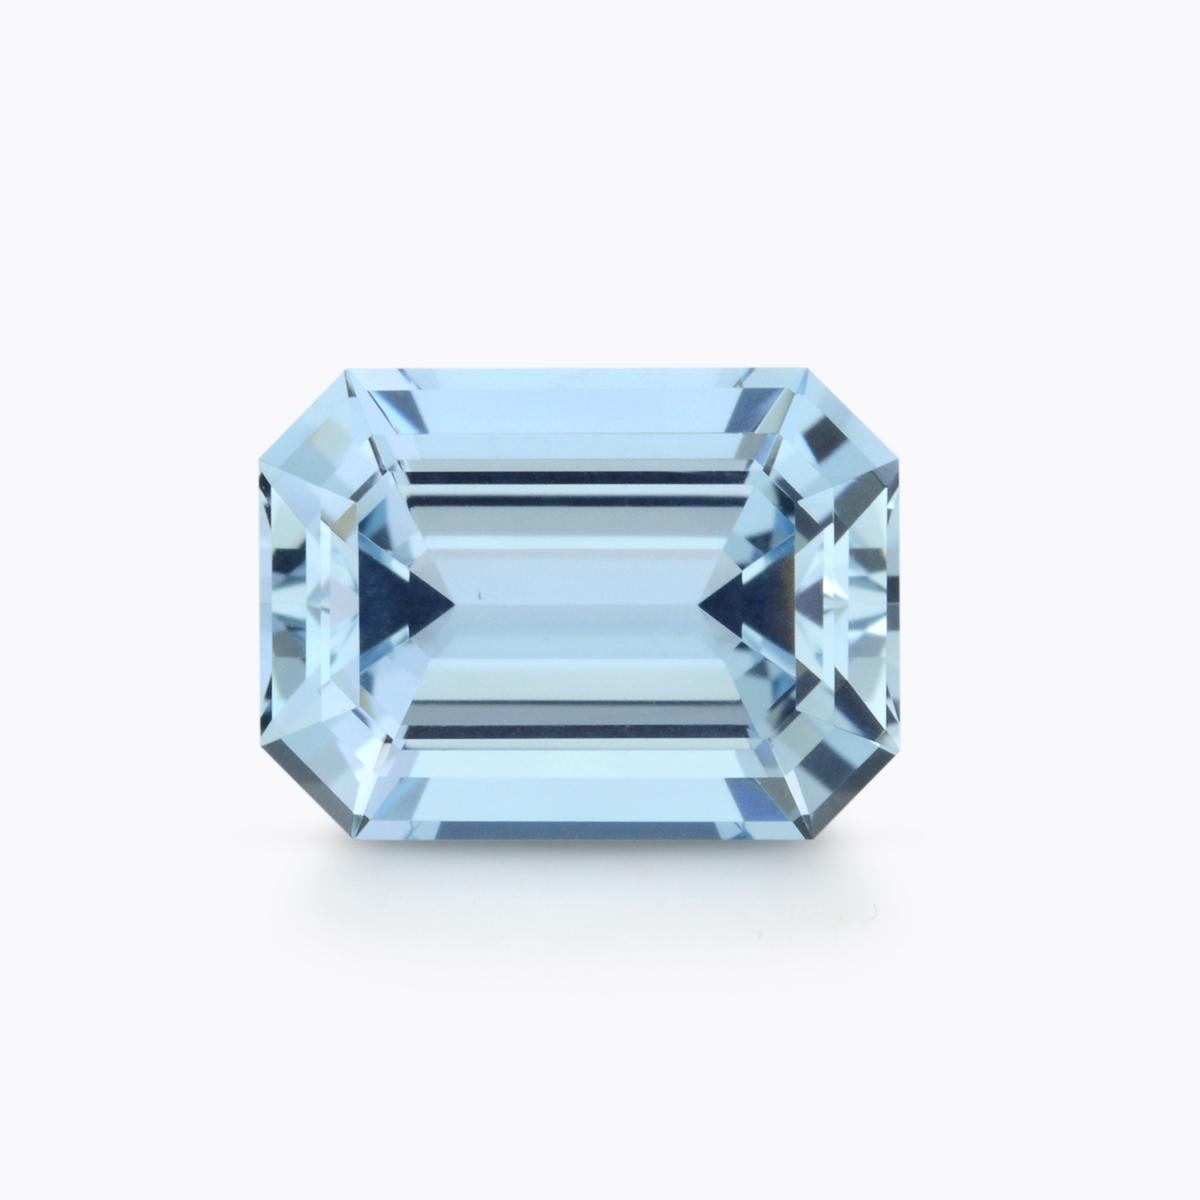 Fantastic 2.64 carat Aquamarine emerald-cut loose gemstone, offered unmounted to someone special.
Dimensions: 10 x 7.4 x 5.2 mm.
Returns are accepted and paid by us within 7 days of delivery.
We offer supreme custom jewelry work upon request. Please